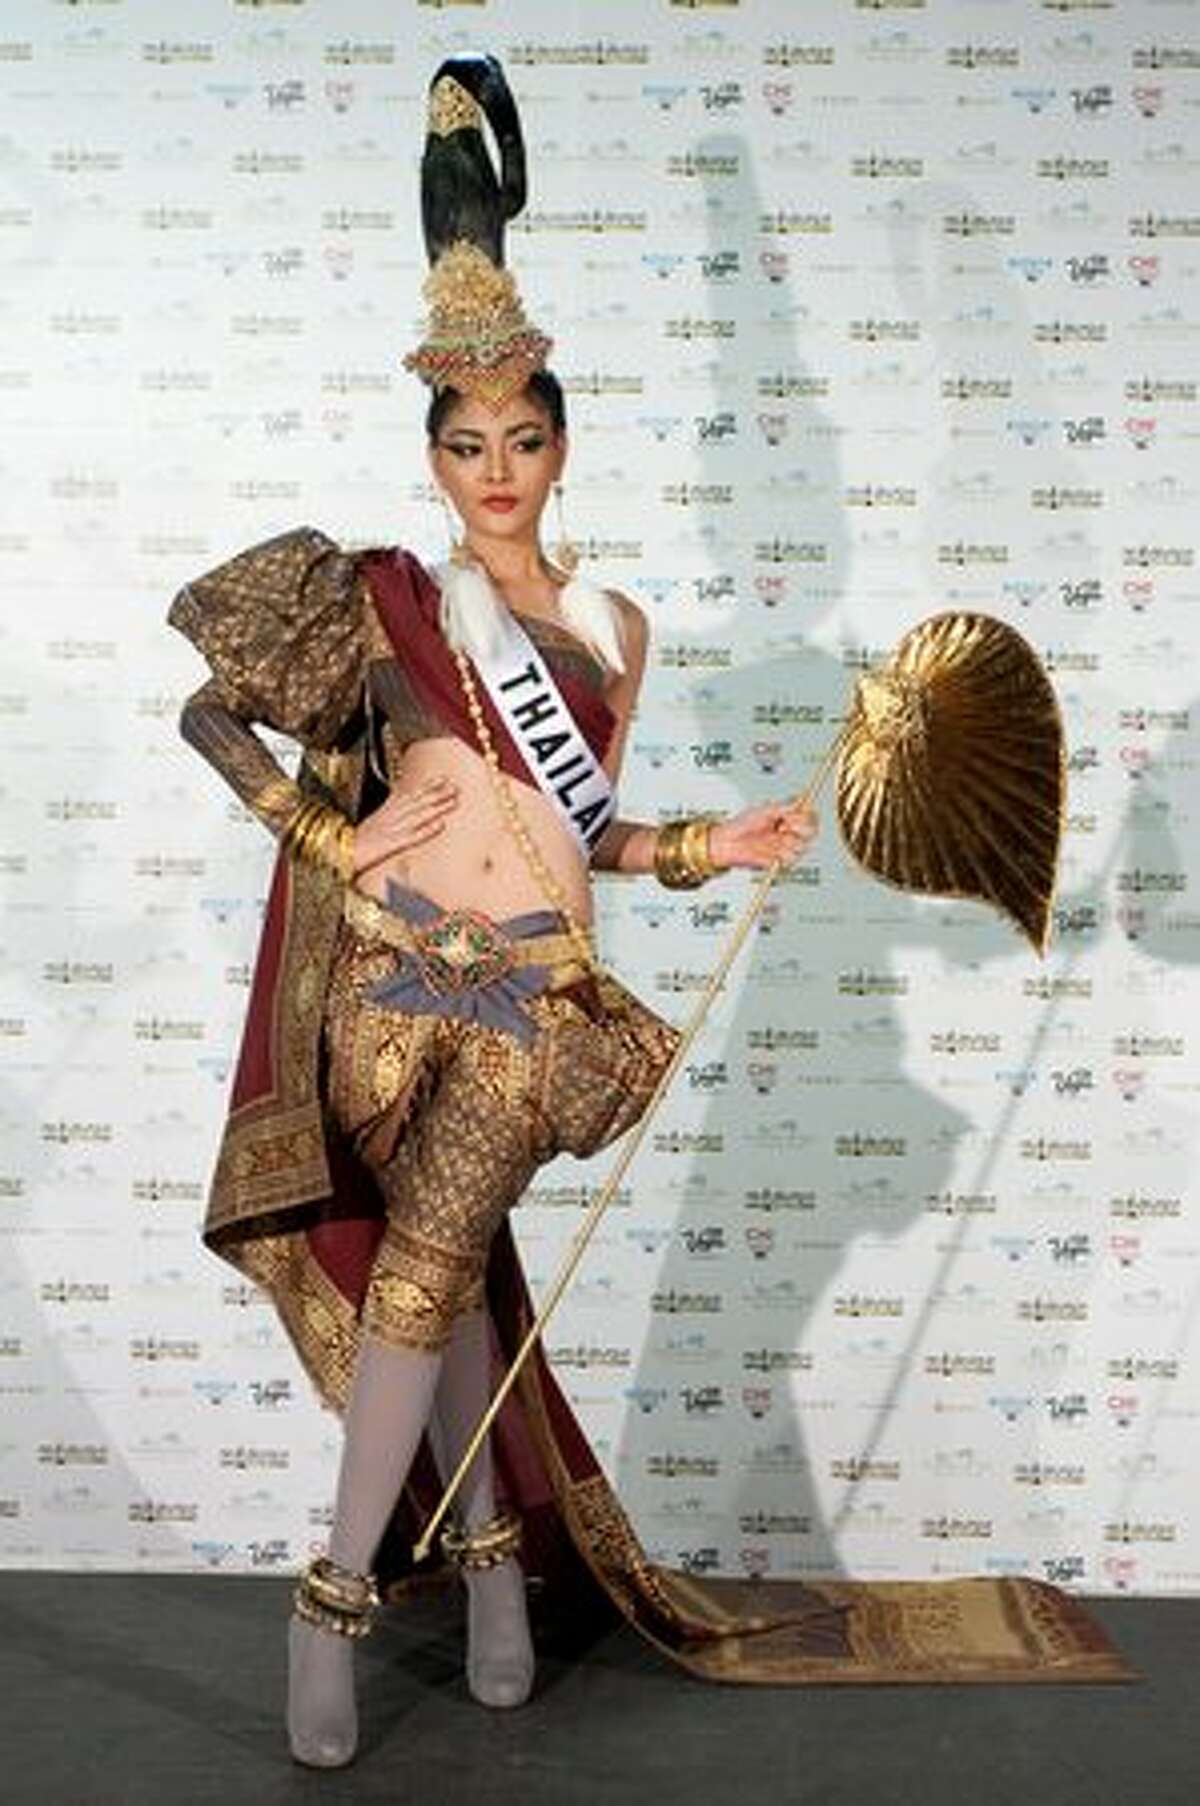 Fonthip Watcharatrakul, Miss Thailand 2010, also won for best national costume, seen here.